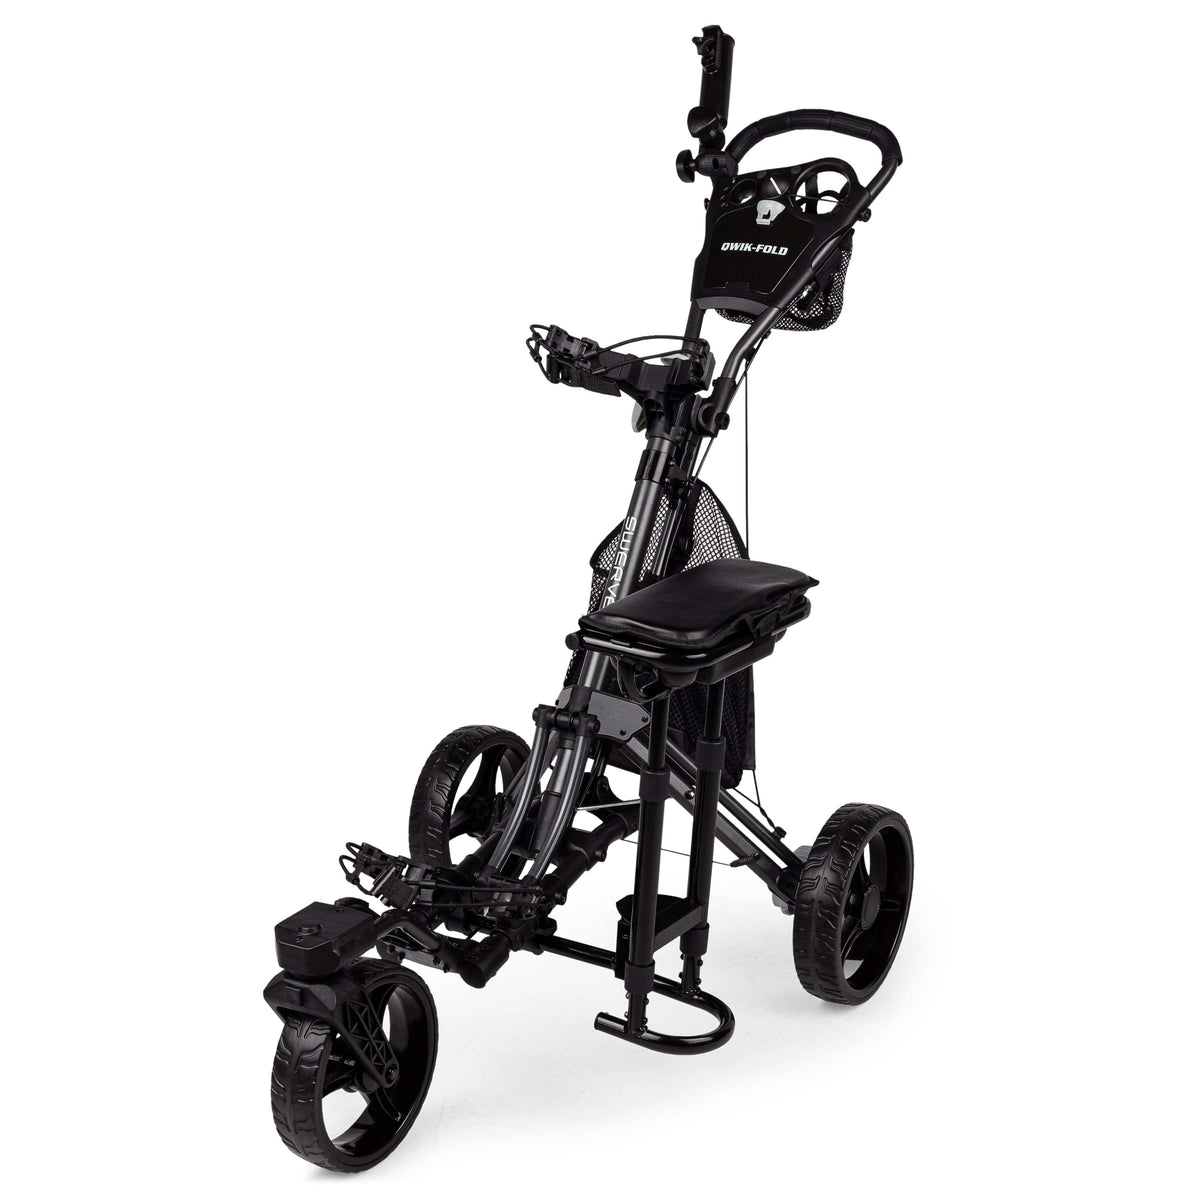 Founders Club Swerve 360 Swivel Wheel Qwik Fold Golf Push Cart with Deluxe Seat (pick color)